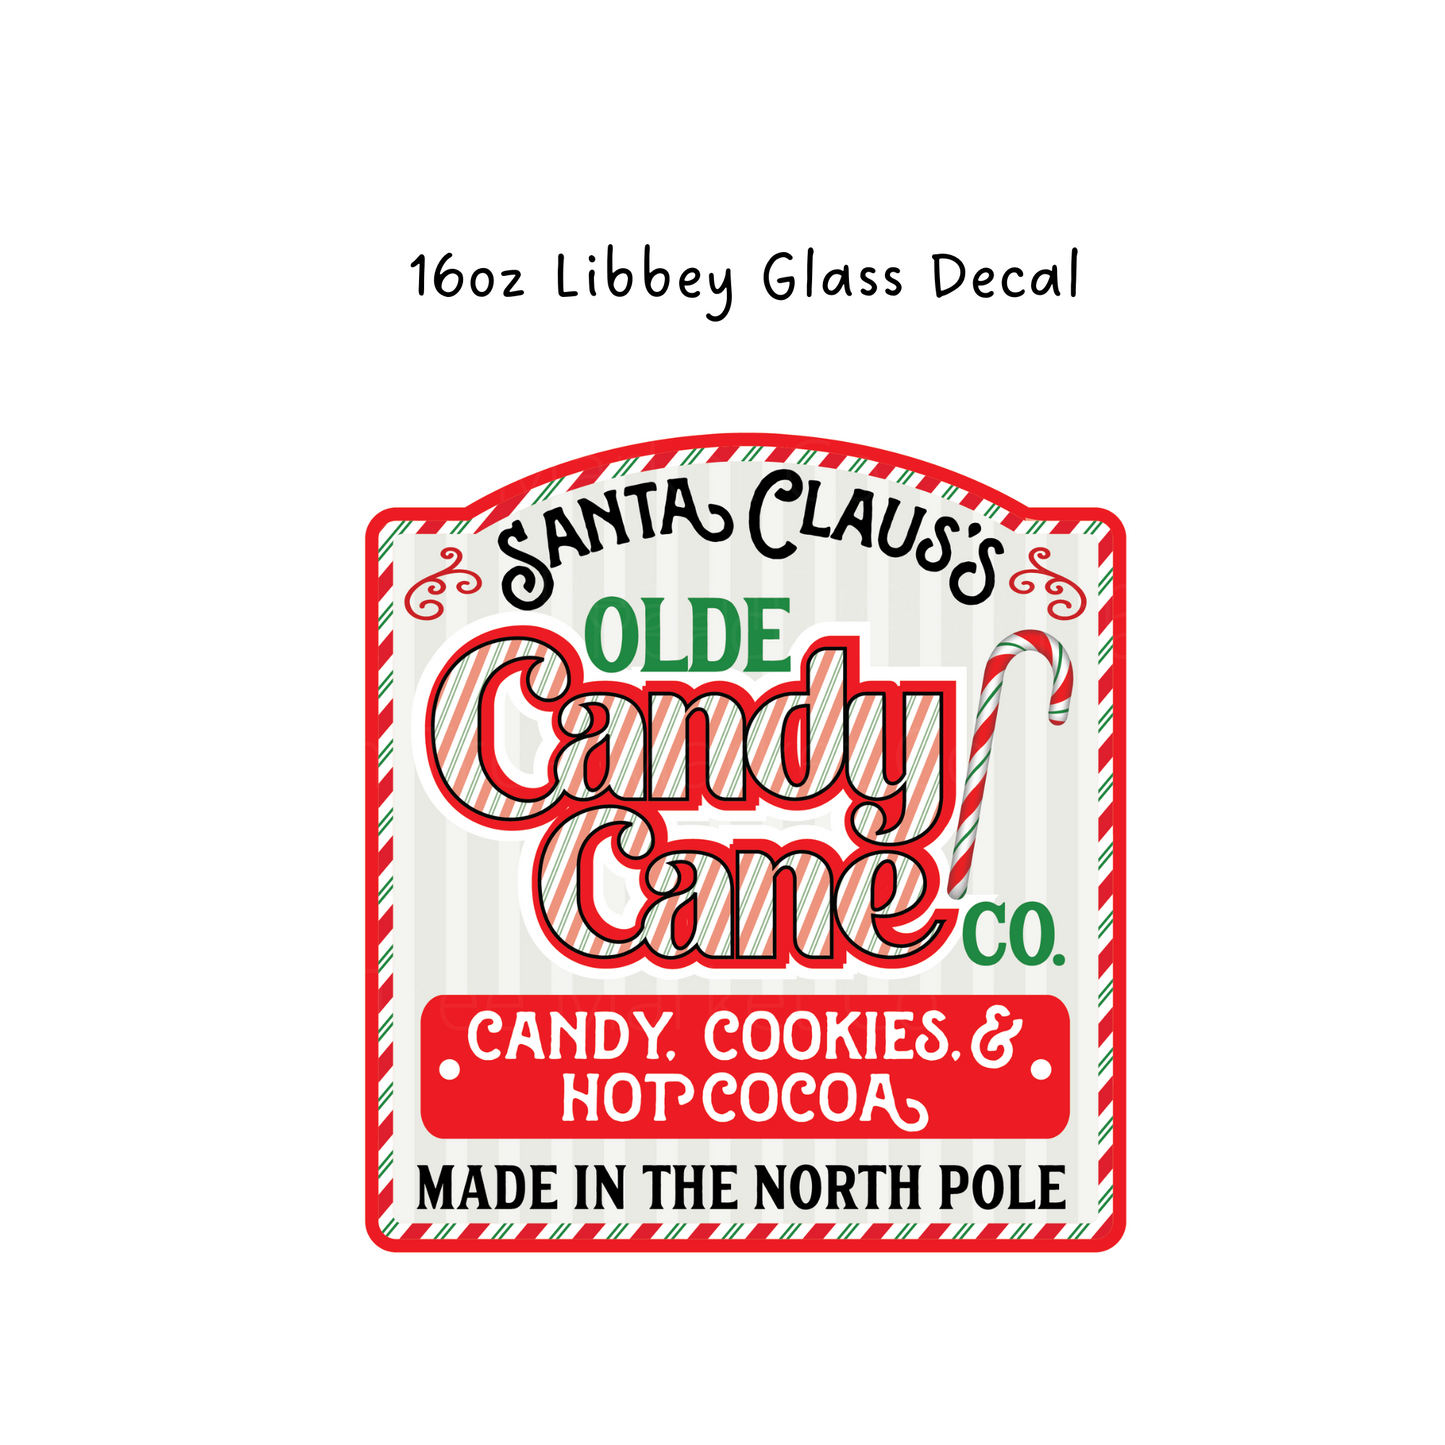 Candy Cane Co Libbey Beer Glass Decal